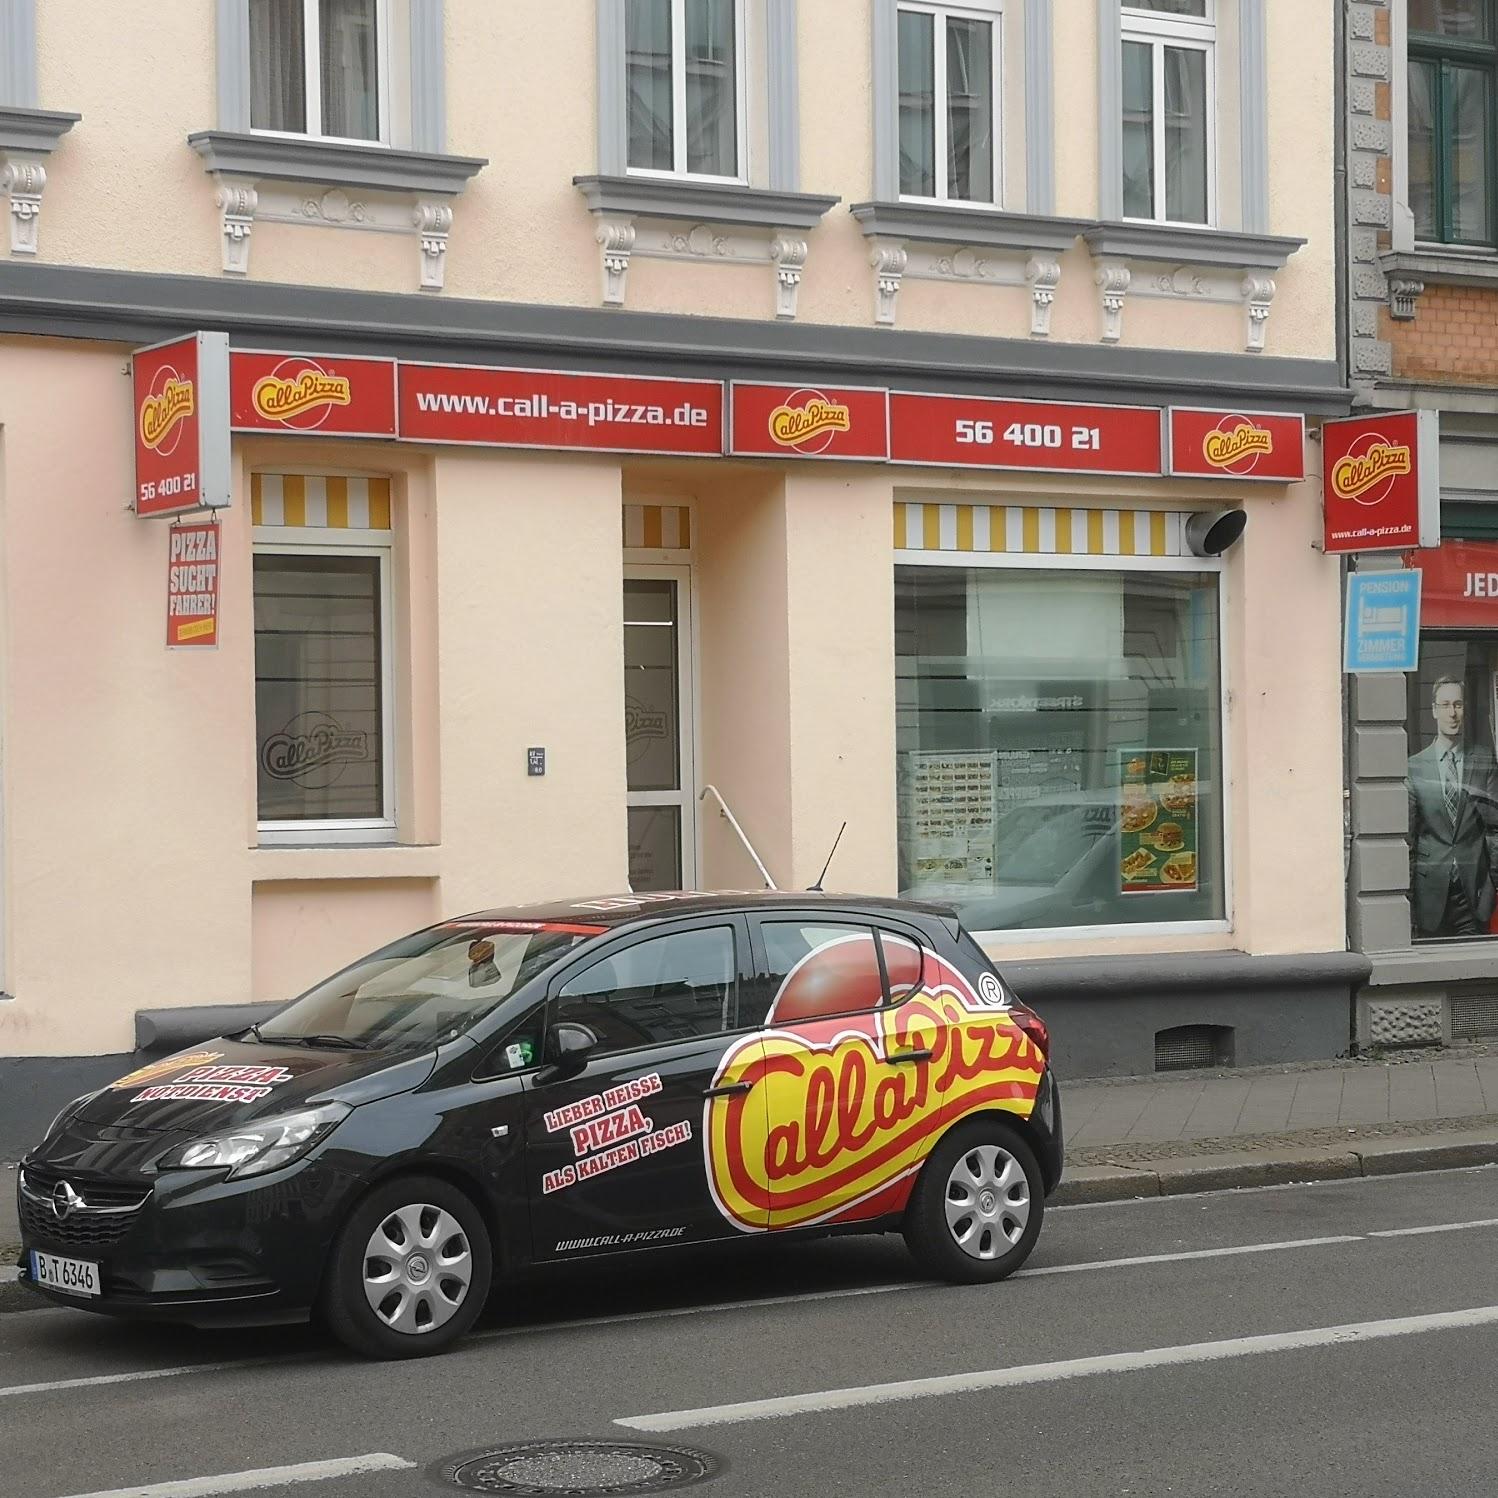 Restaurant "Call a Pizza" in Leipzig